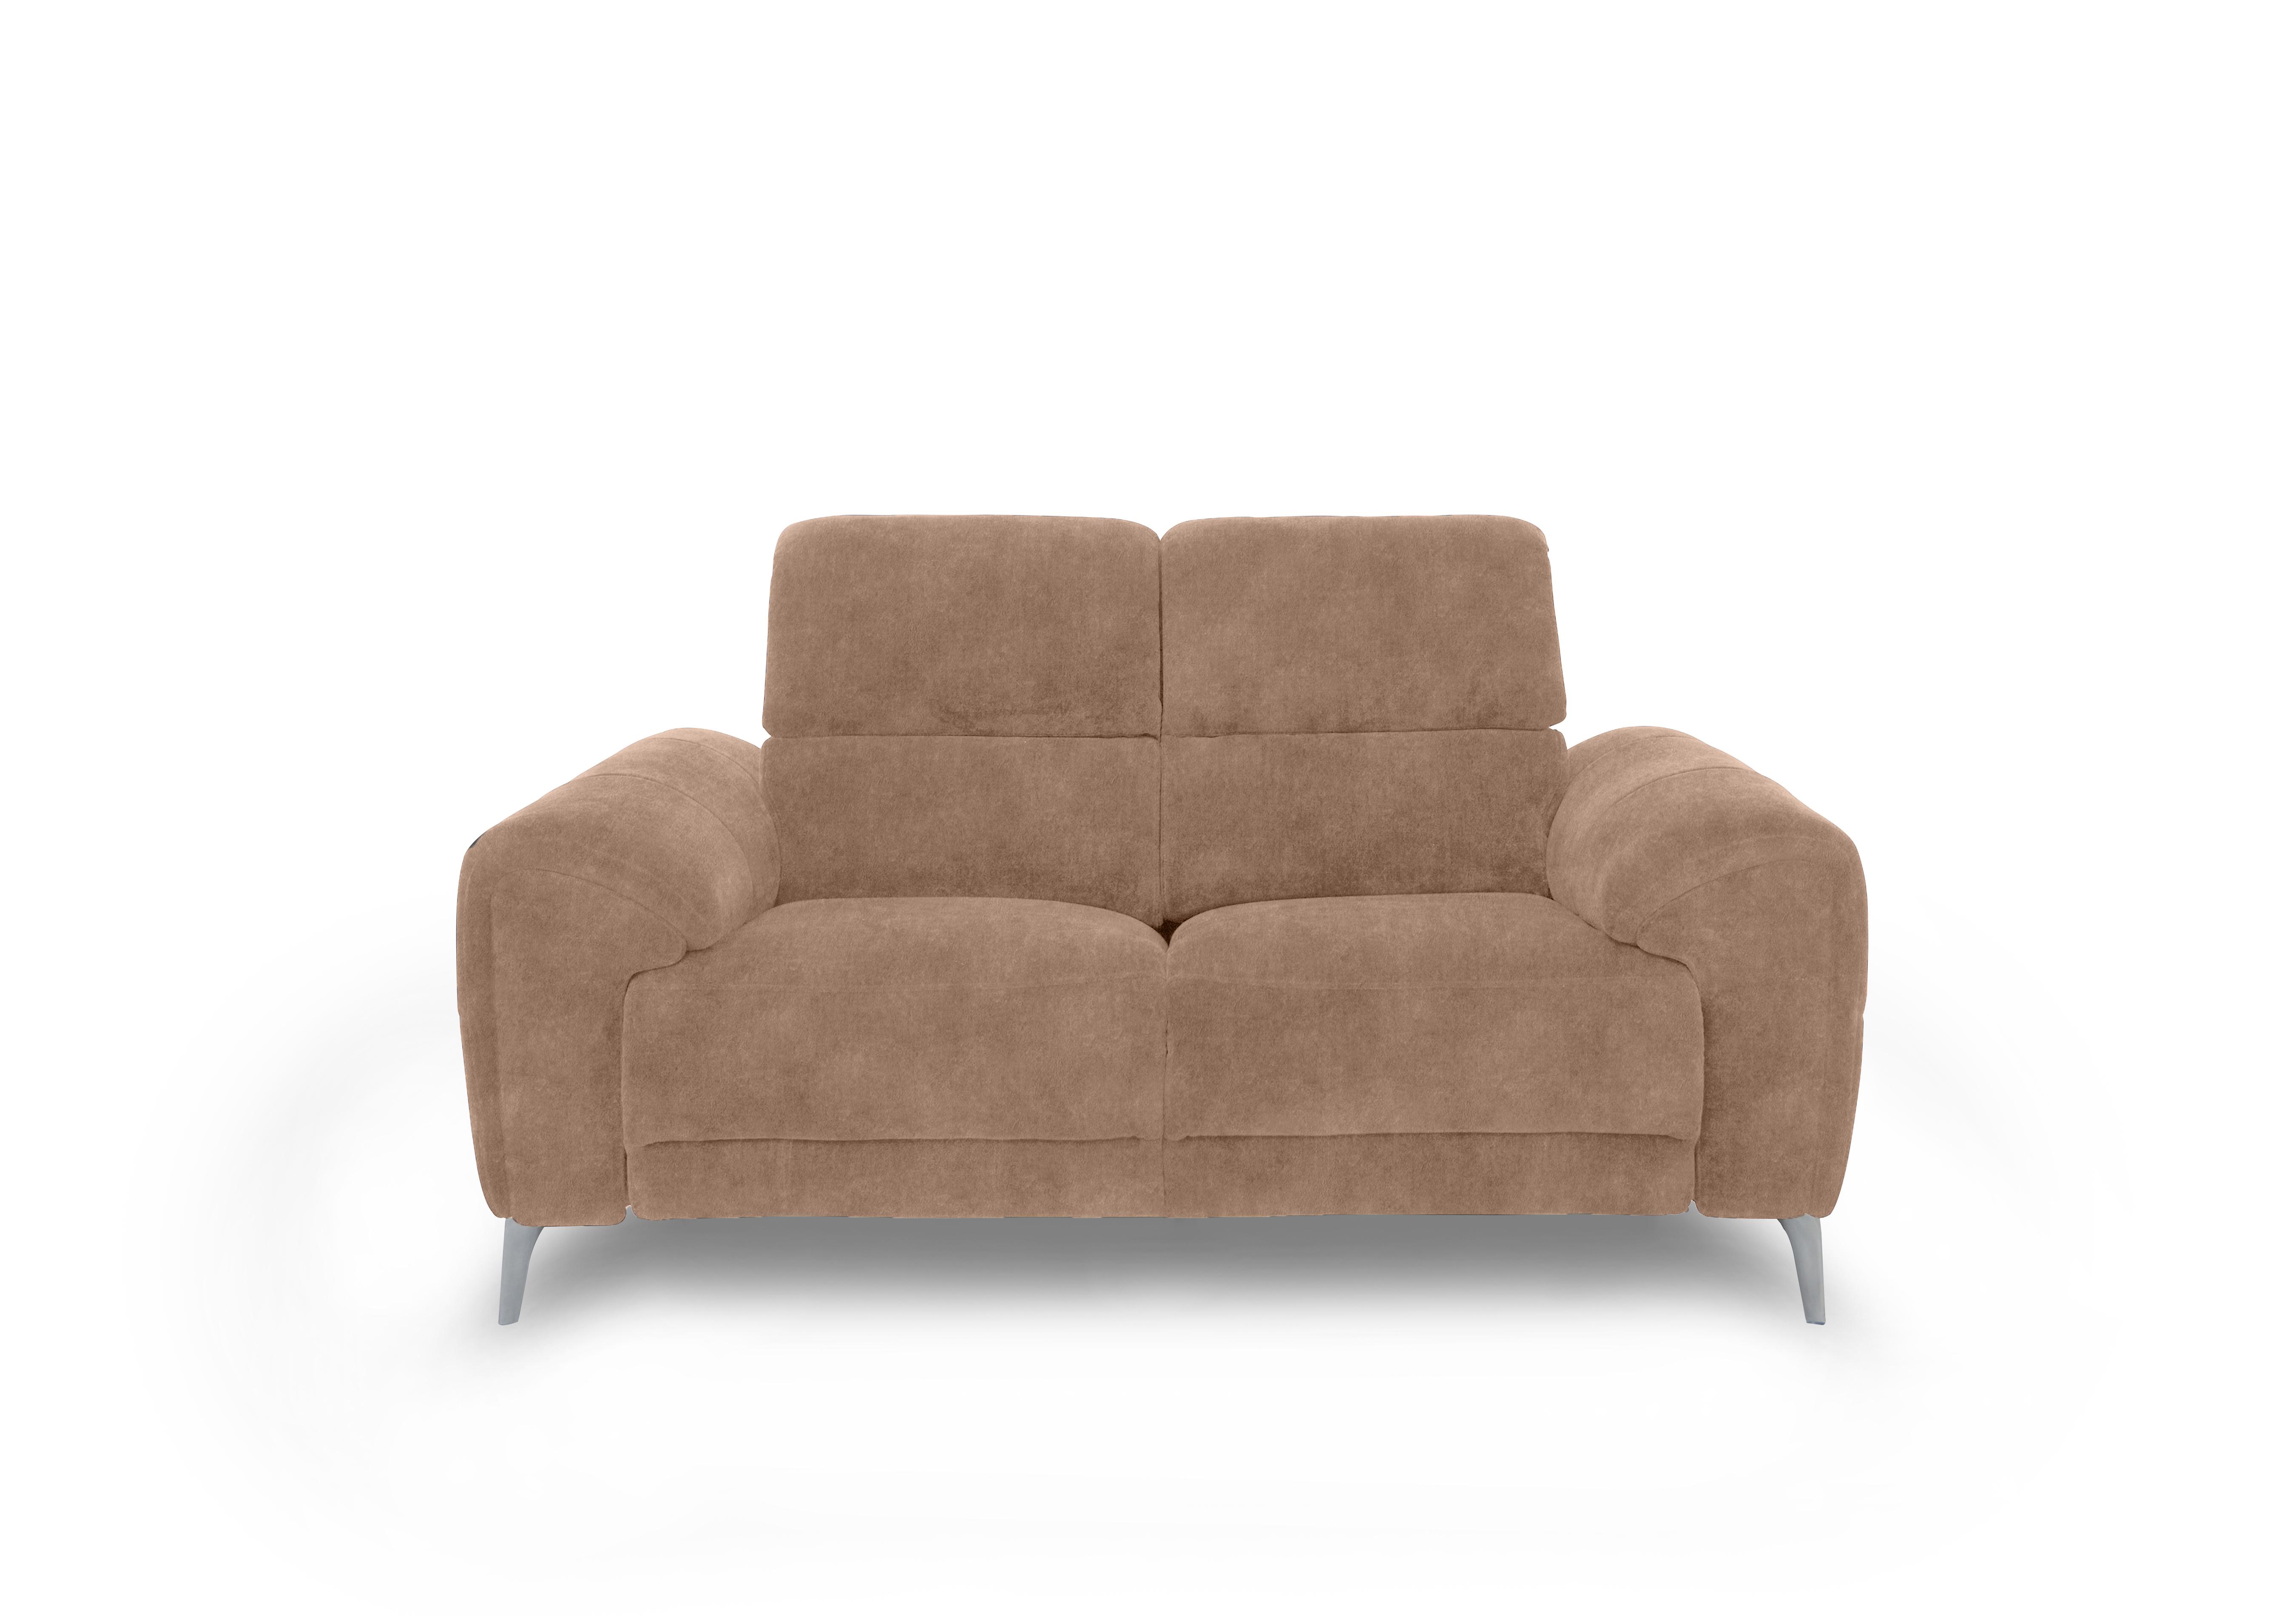 Vino Fabric 2 Seater Power Recliner Sofa with Power Headrests and Heated Seats in 43507 Sand on Furniture Village